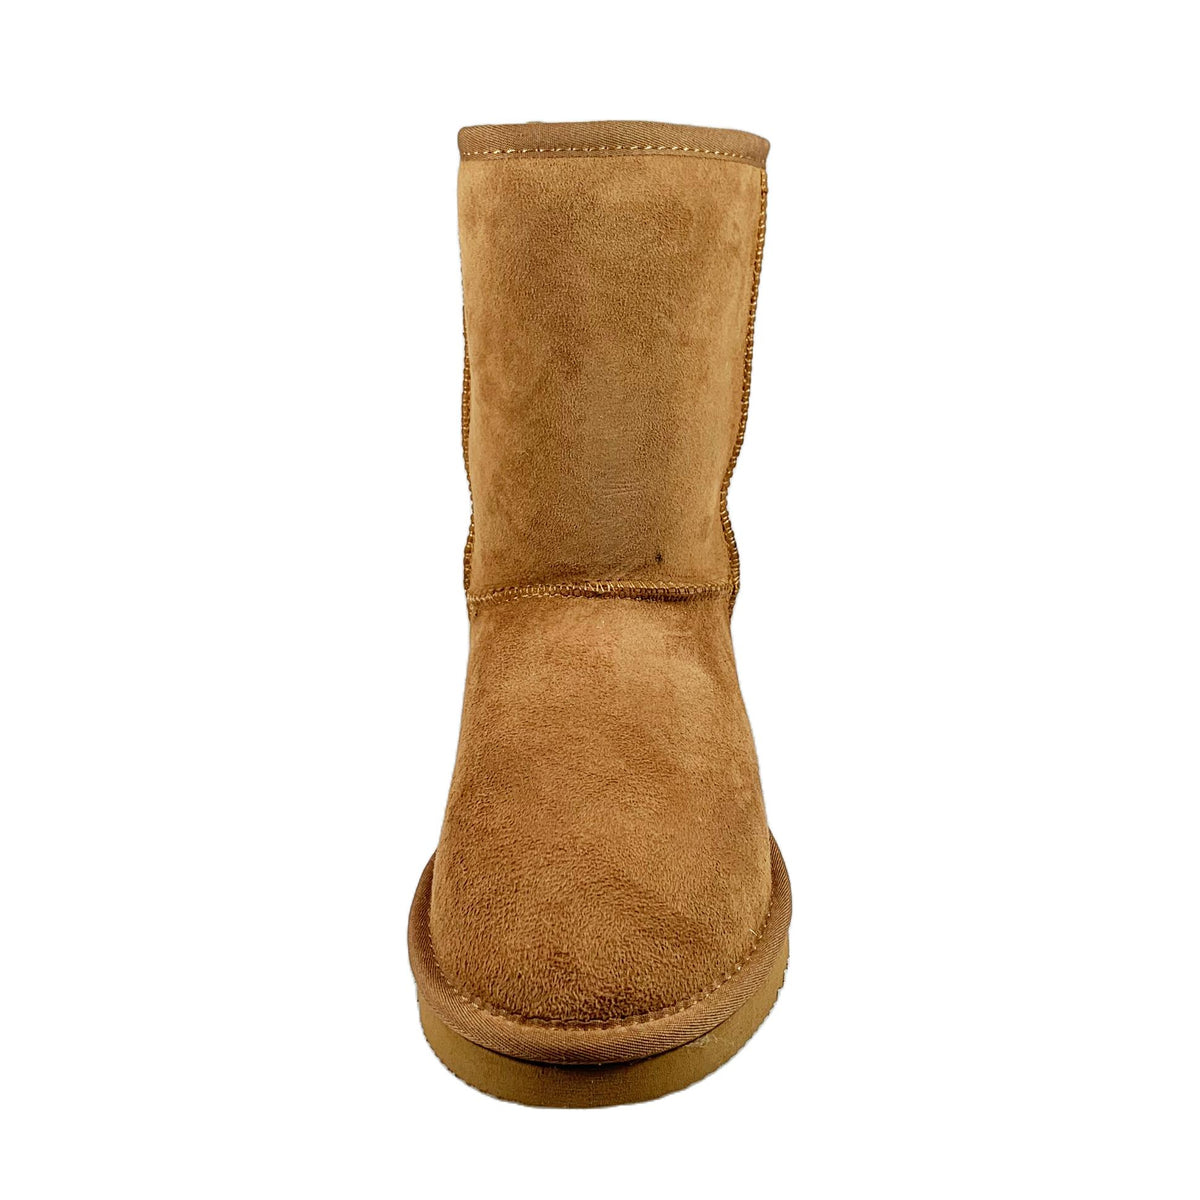 UOO Winter Boots with Fur Lining, Camel, Size US 7 Wide